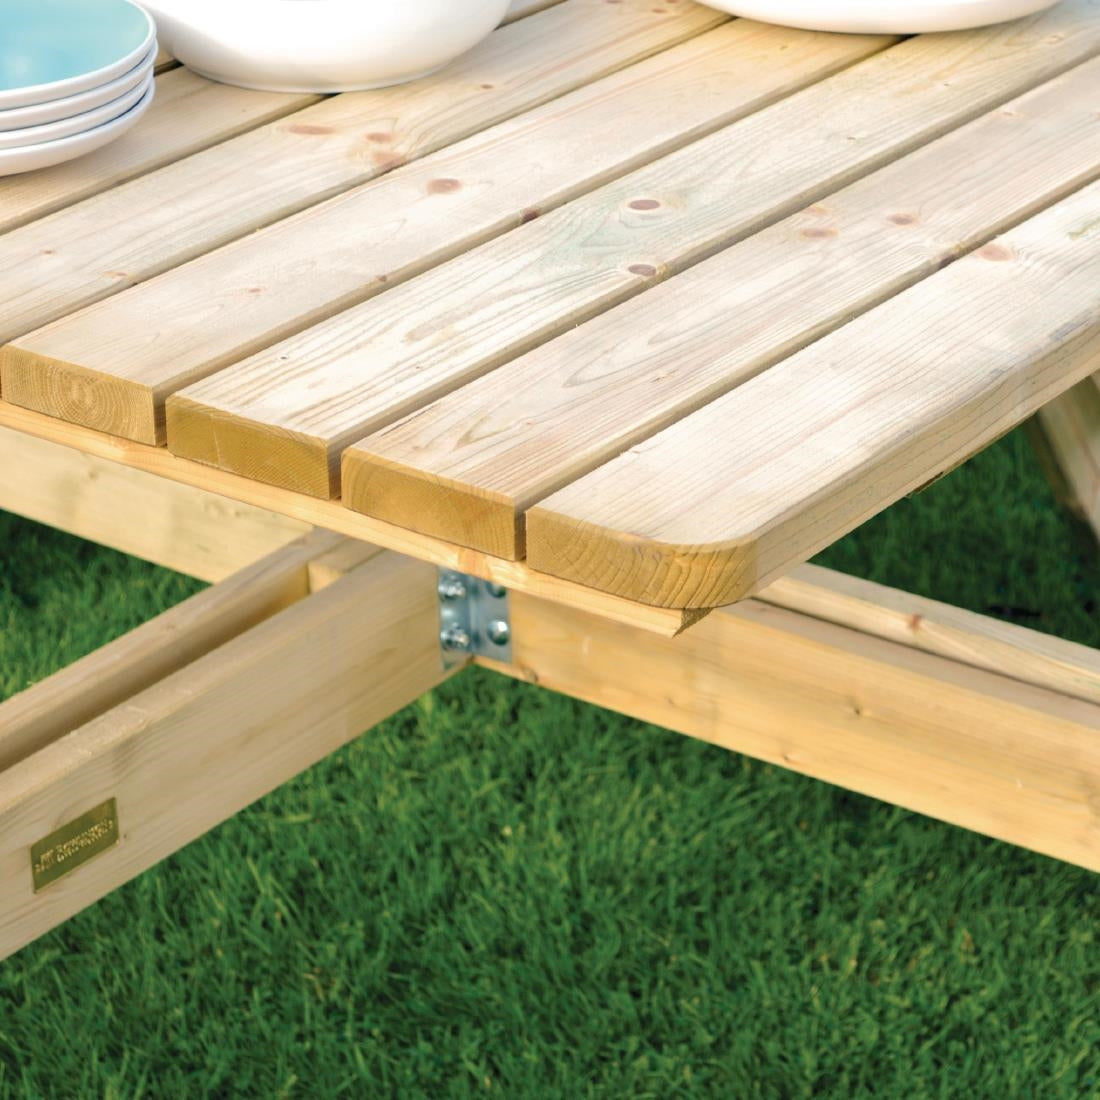 Rowlinson Square Wooden Picnic Table 6.5ft